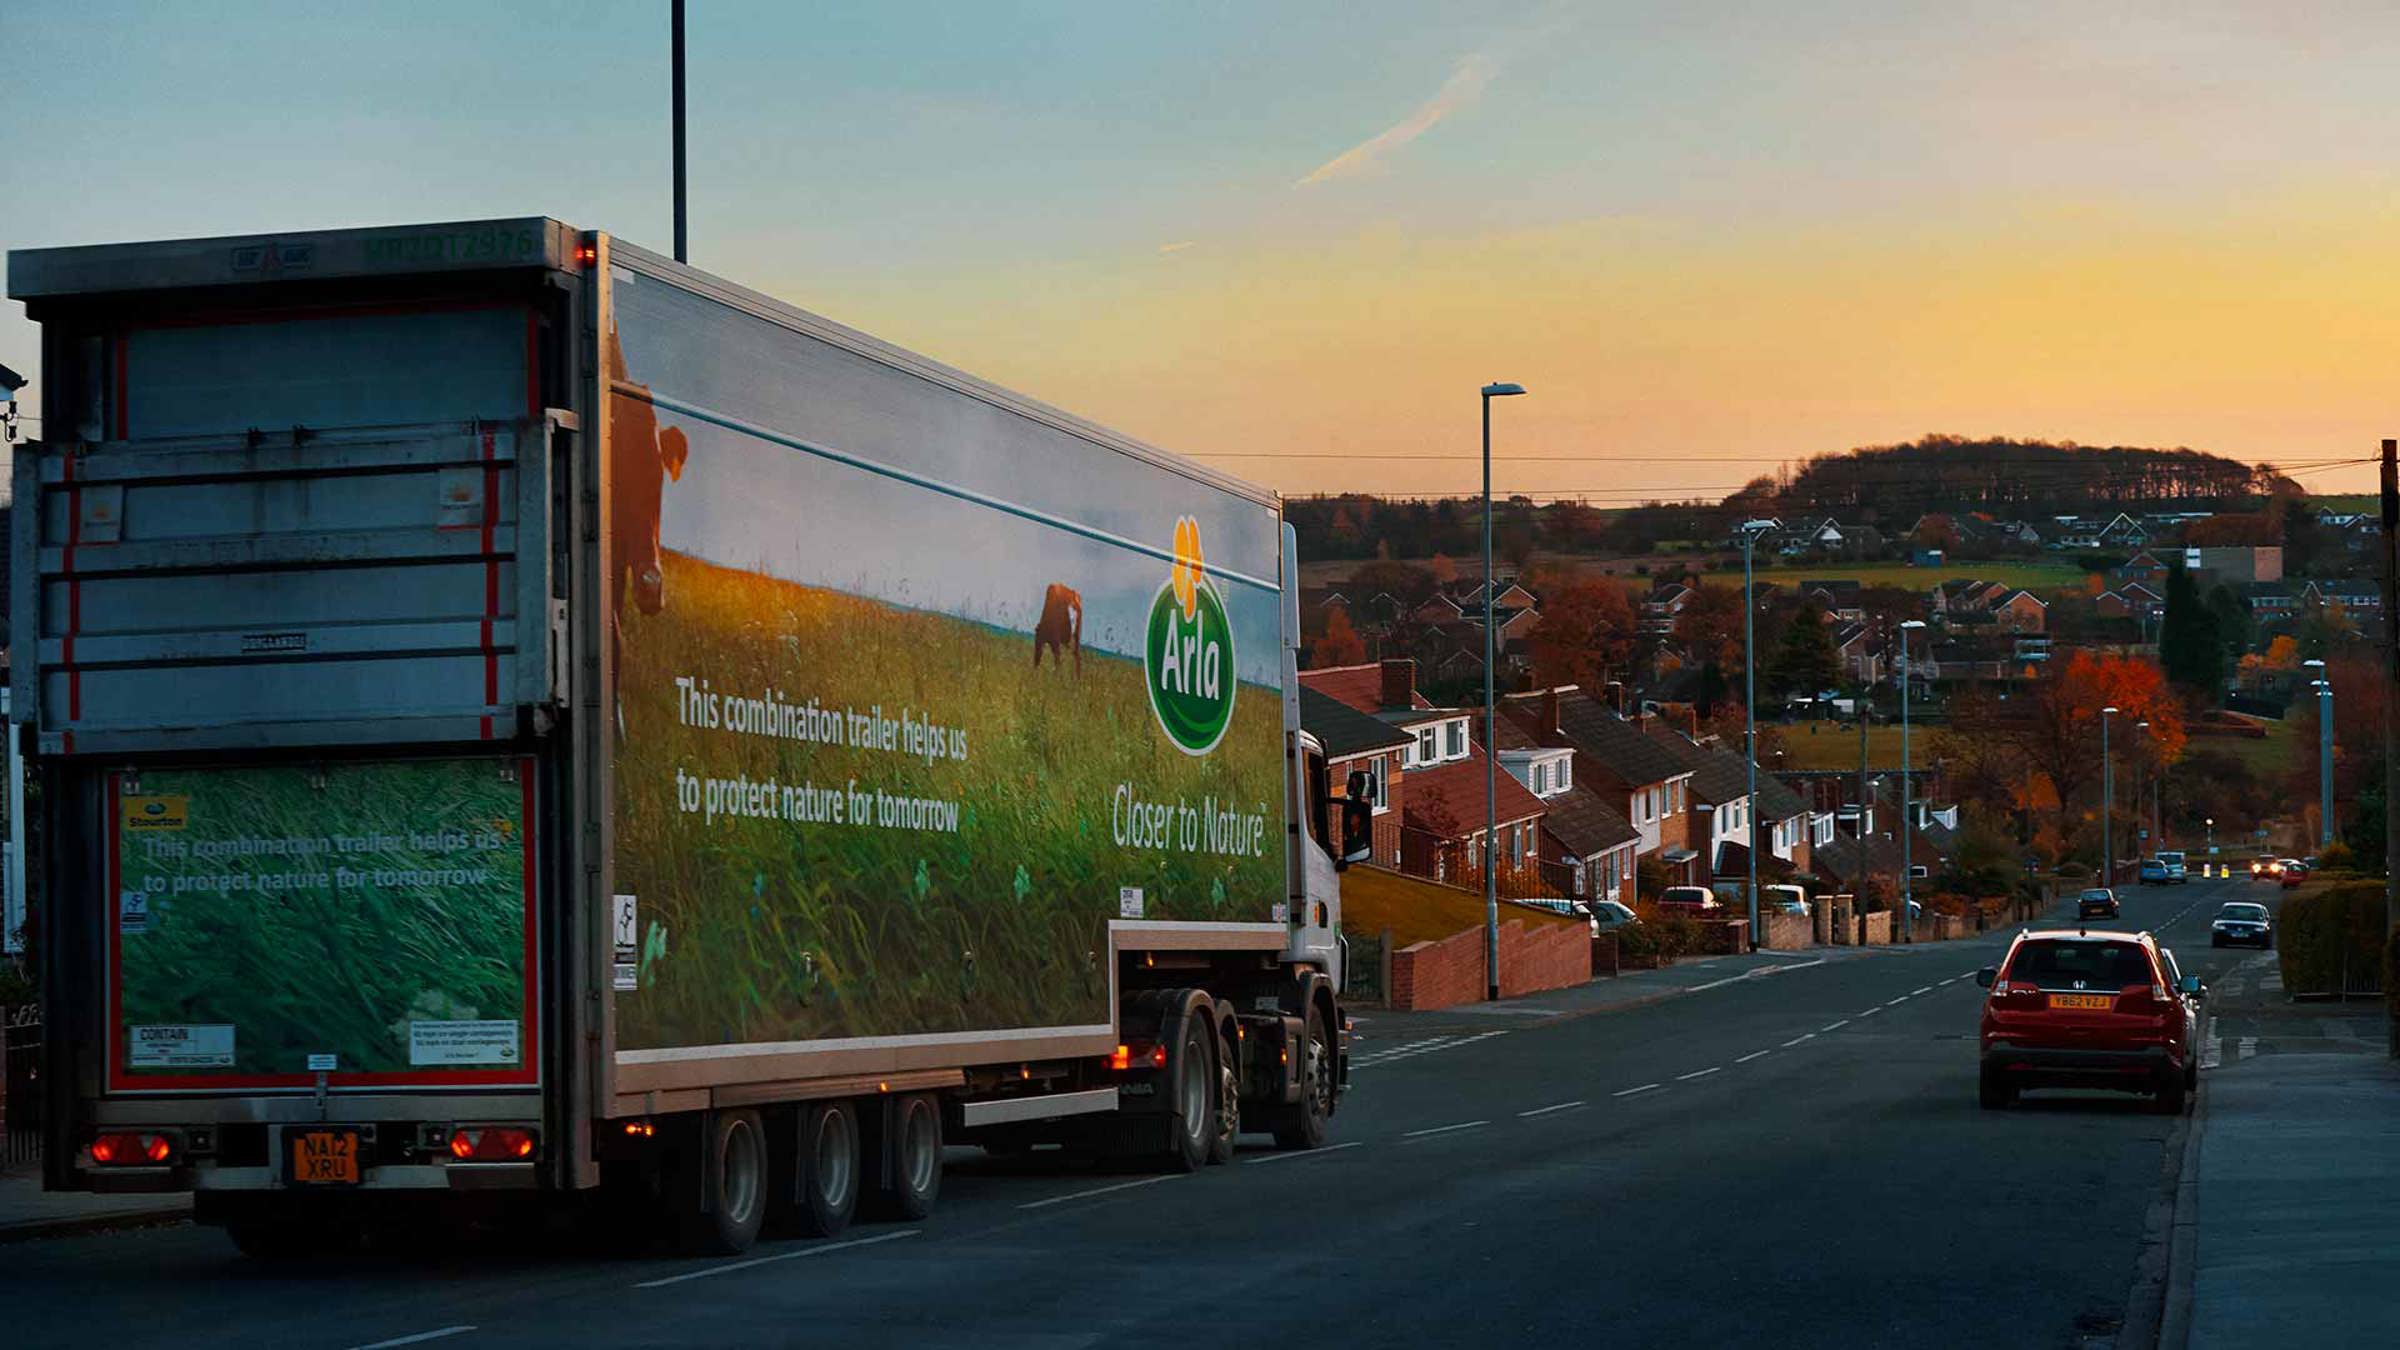 Arla trailer truck driving through a residential area at sunset